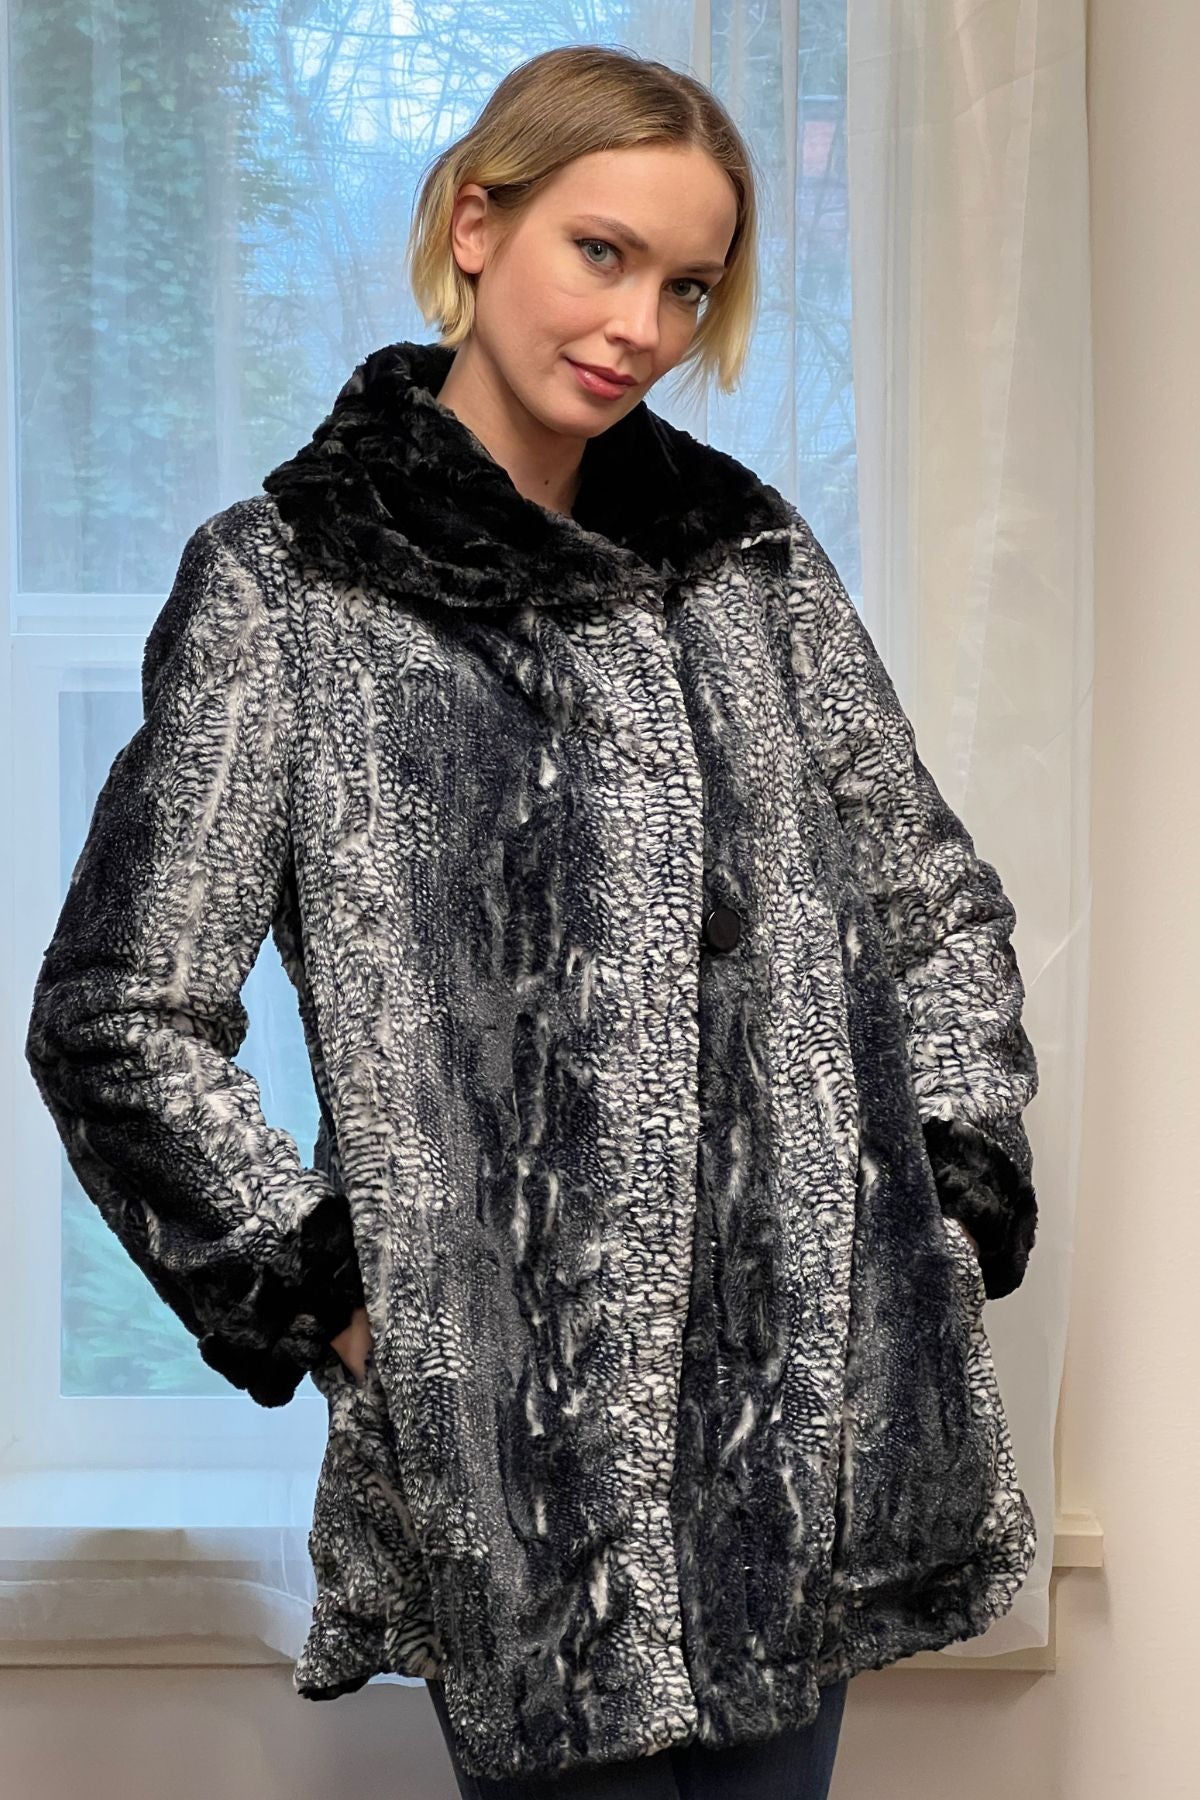 Model wearing Hepburn Swing Coat | Black Mamba Black and White Faux Fur with Cuddly Chocolate Faux Fur | Handmade in Seattle WA | By Pandemonium Millinery